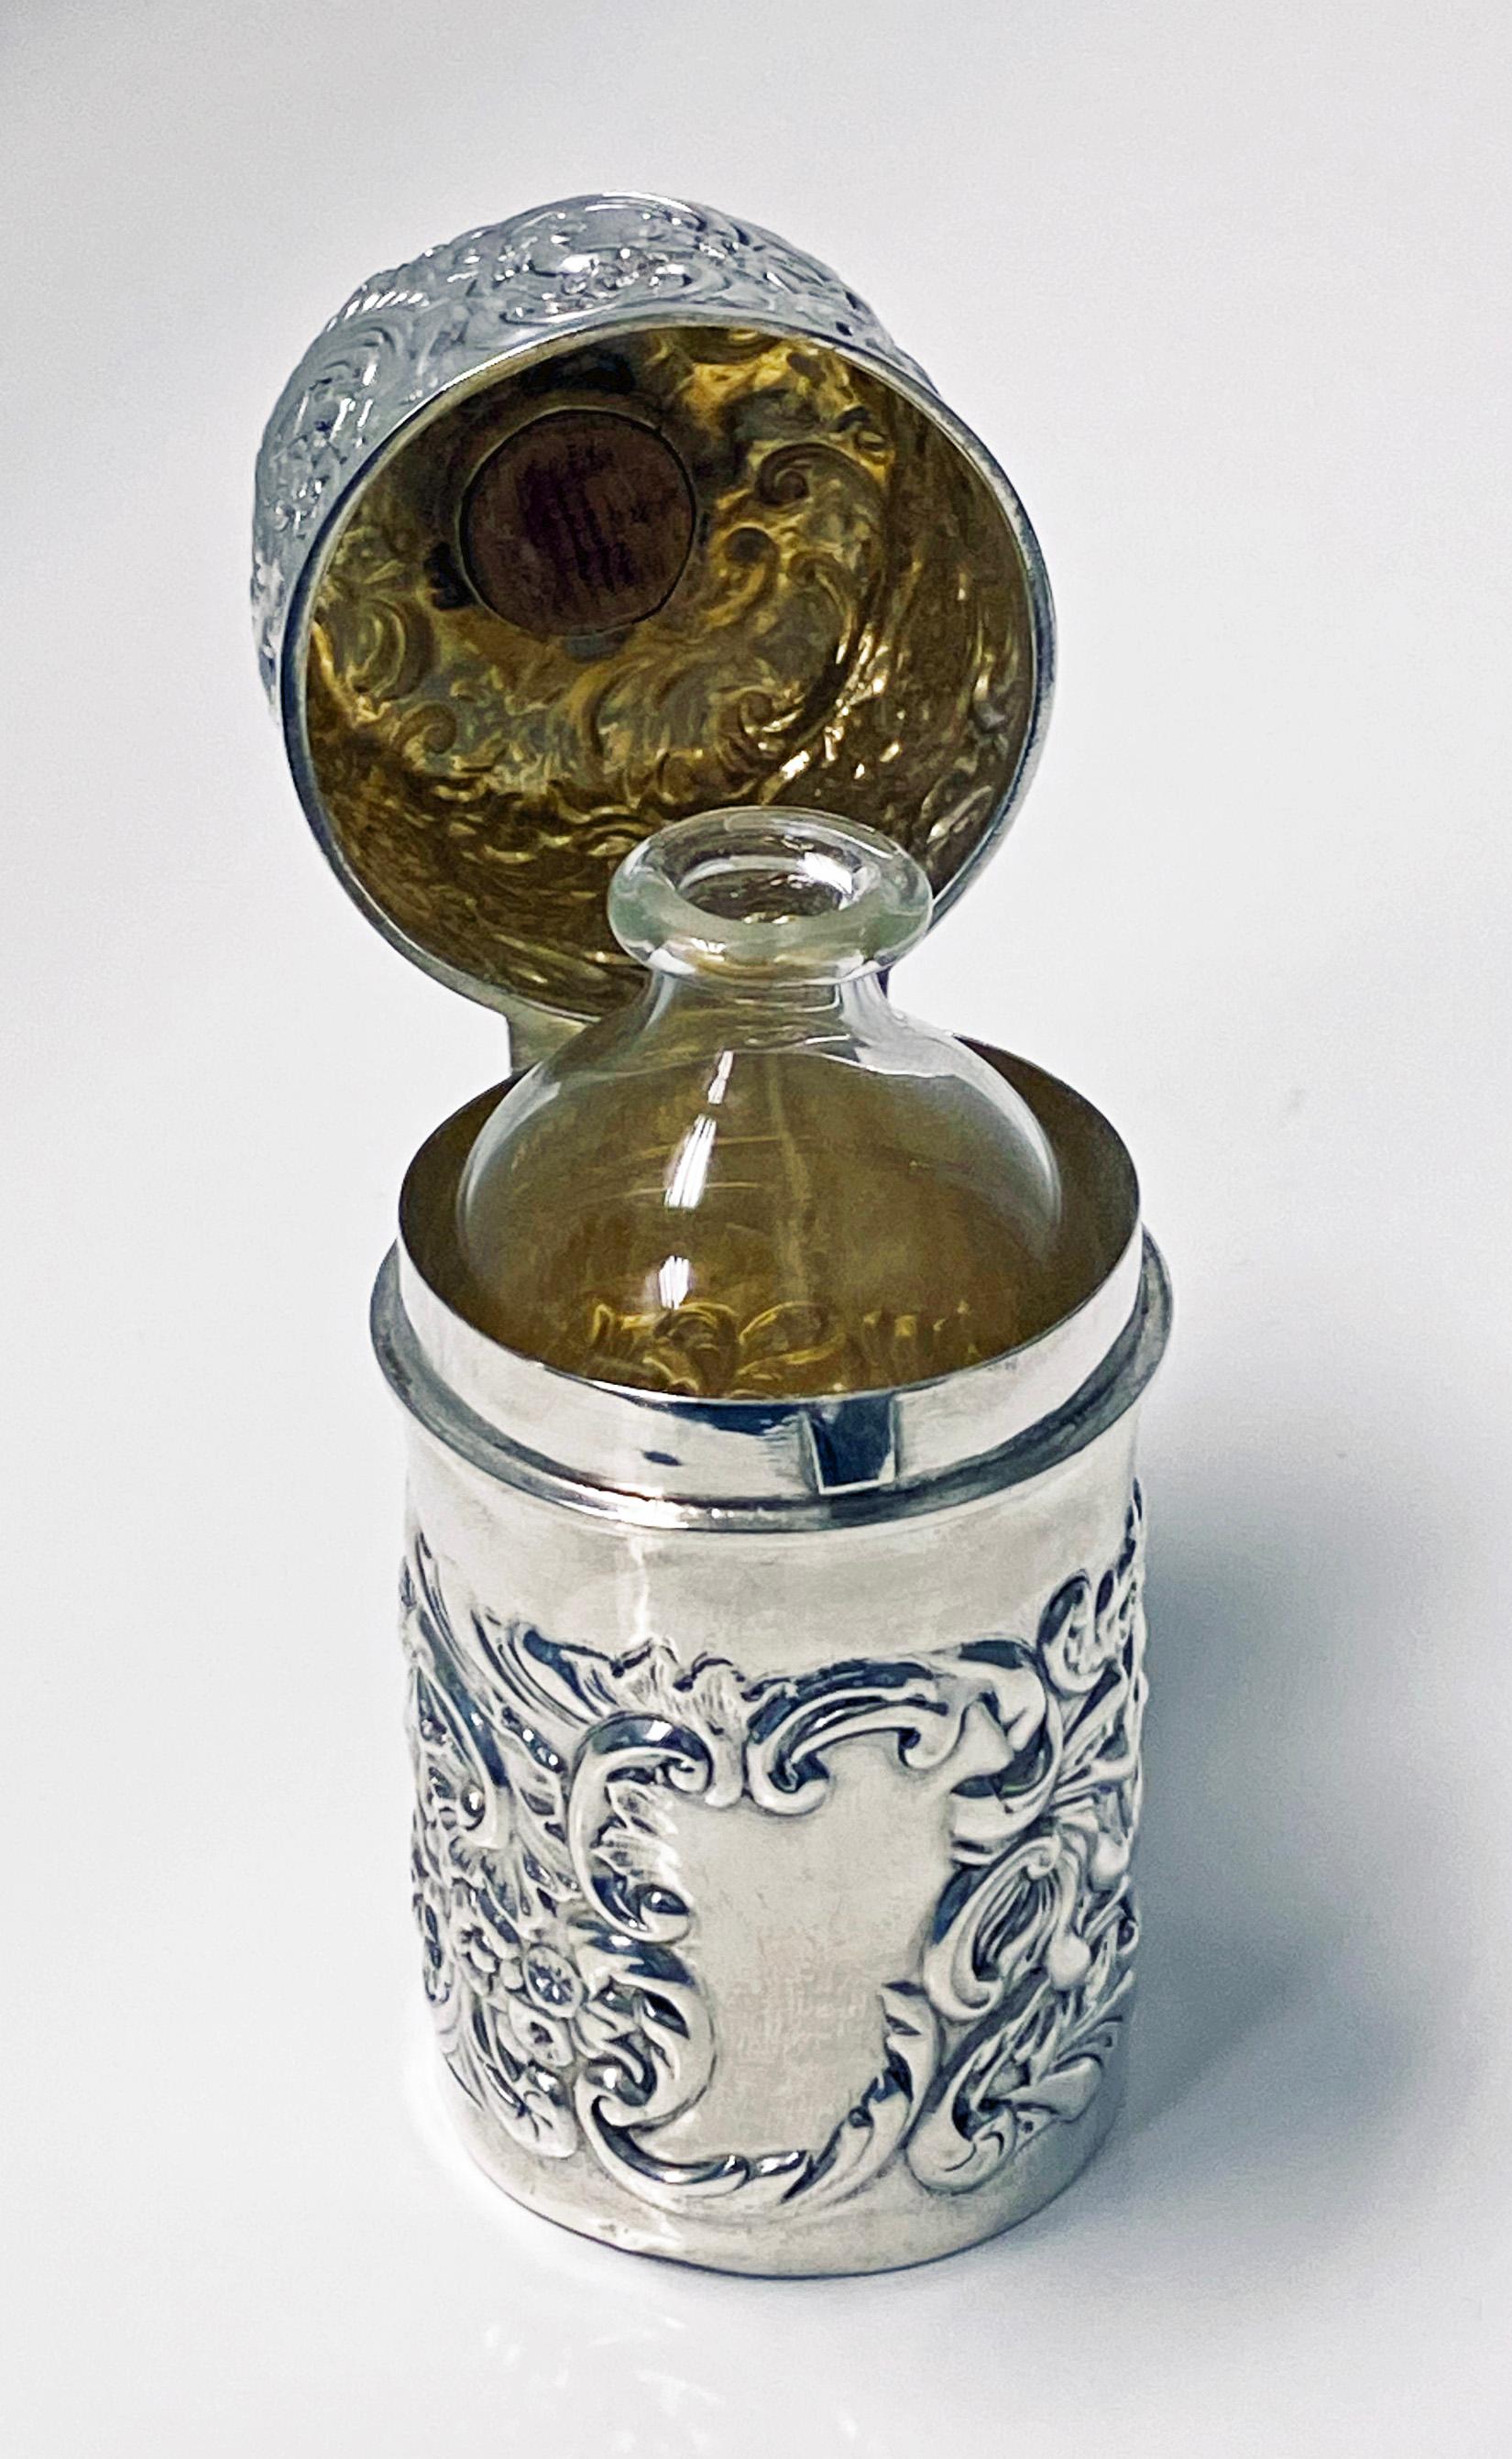 Antique Silver Scent Bottle with Removeable Glass Interior, London 1895 William 2